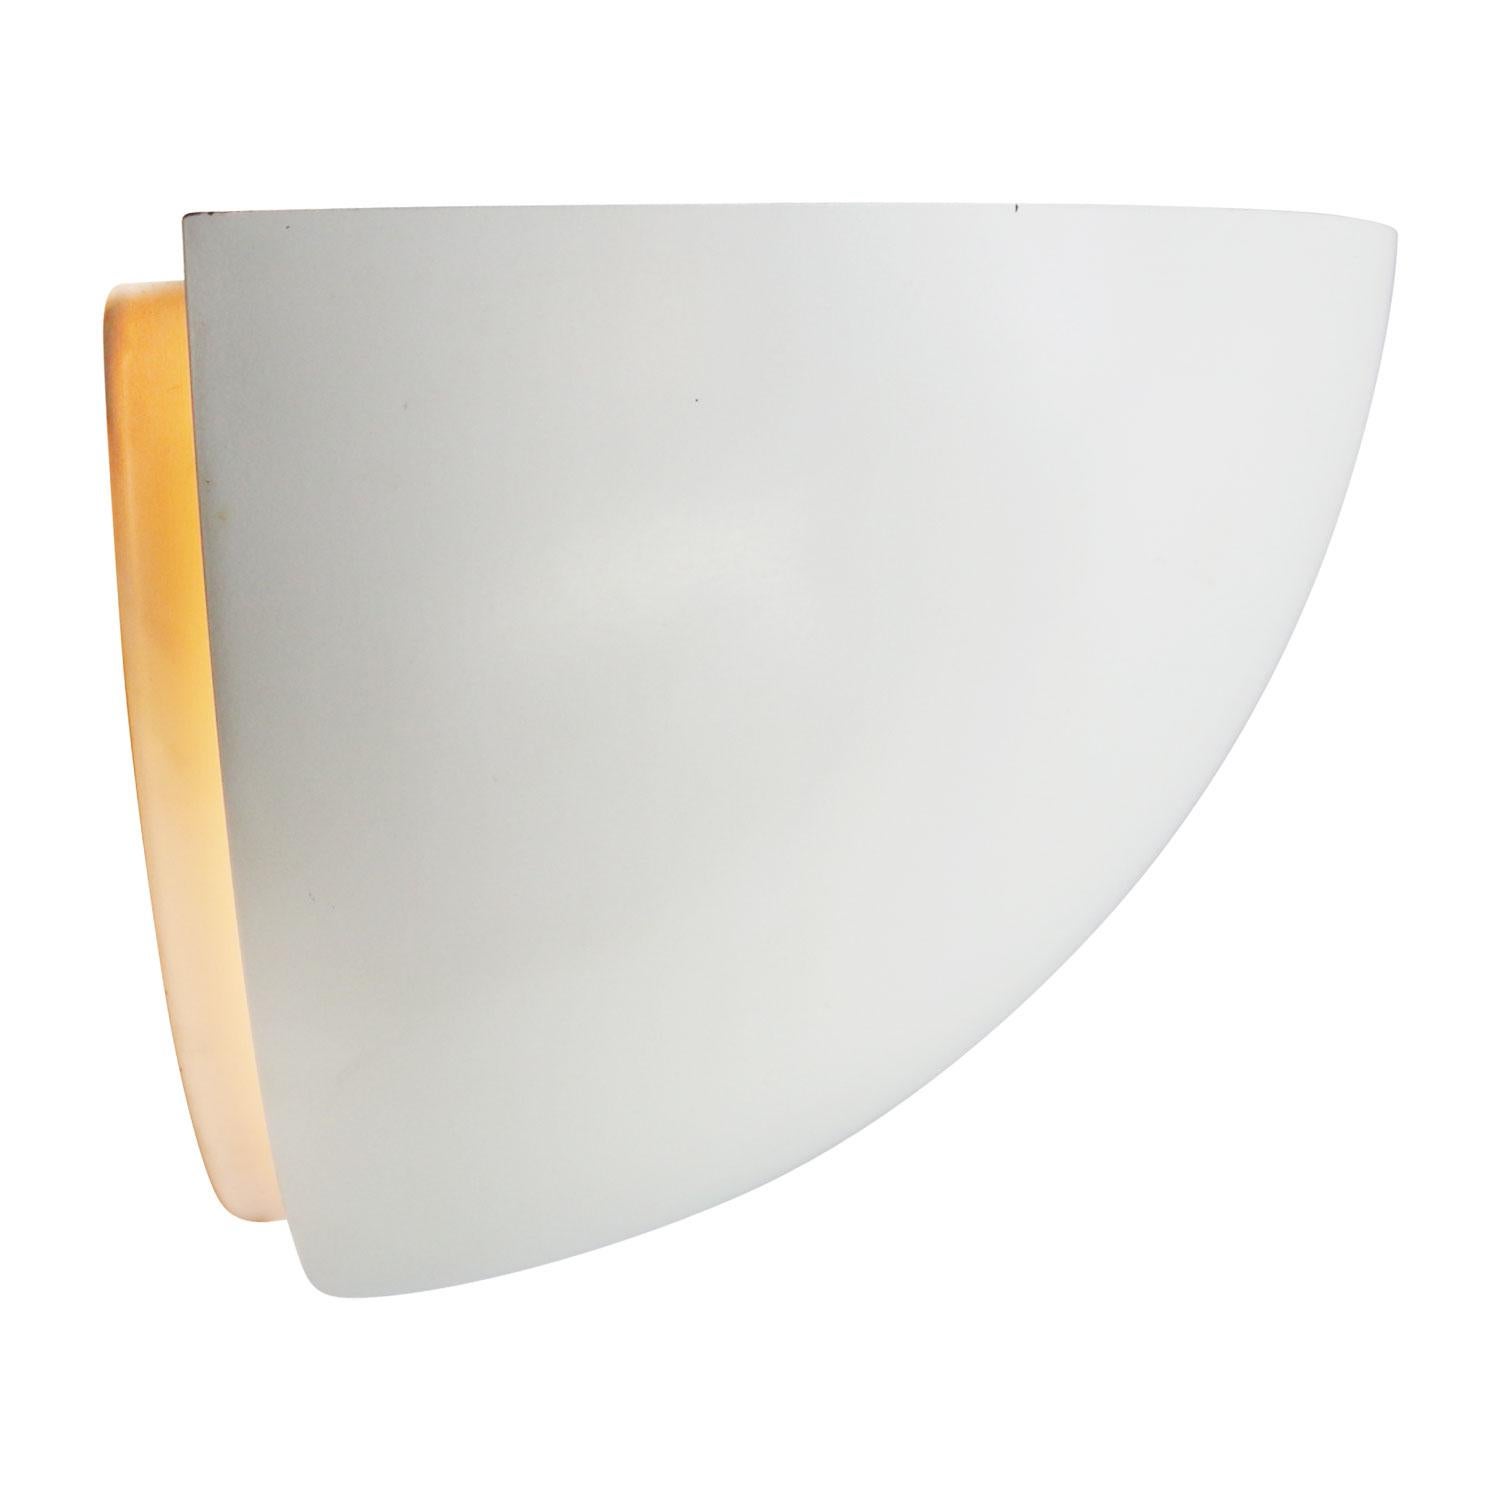 White milk opaline glass wall lamp / scone.
Metal base with white opaline glass.

Weight: 2.60 kg / 5.7 lb

Priced per individual item. All lamps have been made suitable by international standards for incandescent light bulbs, energy-efficient